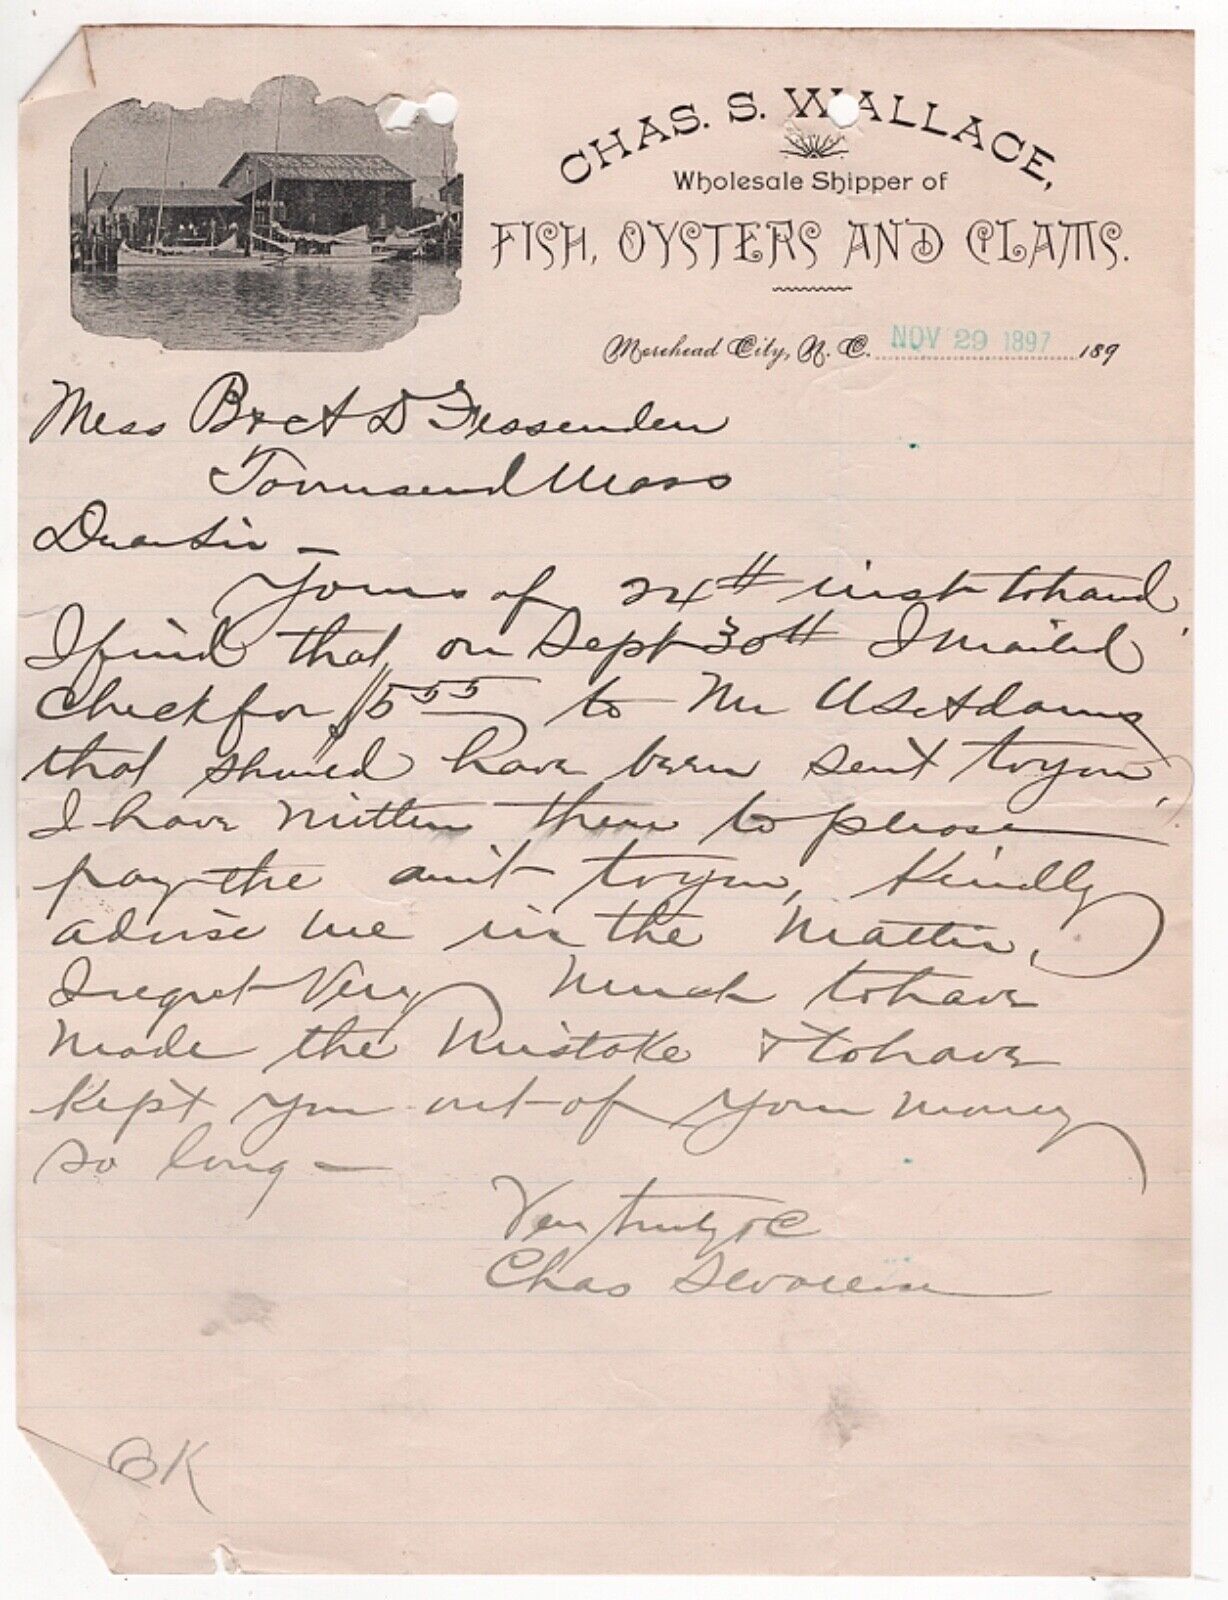 1897 RARE CHAS WALLACE LETTERHEAD FISH OYSTERS CLAMS MOREHEAD CITY NC FESSENDEN